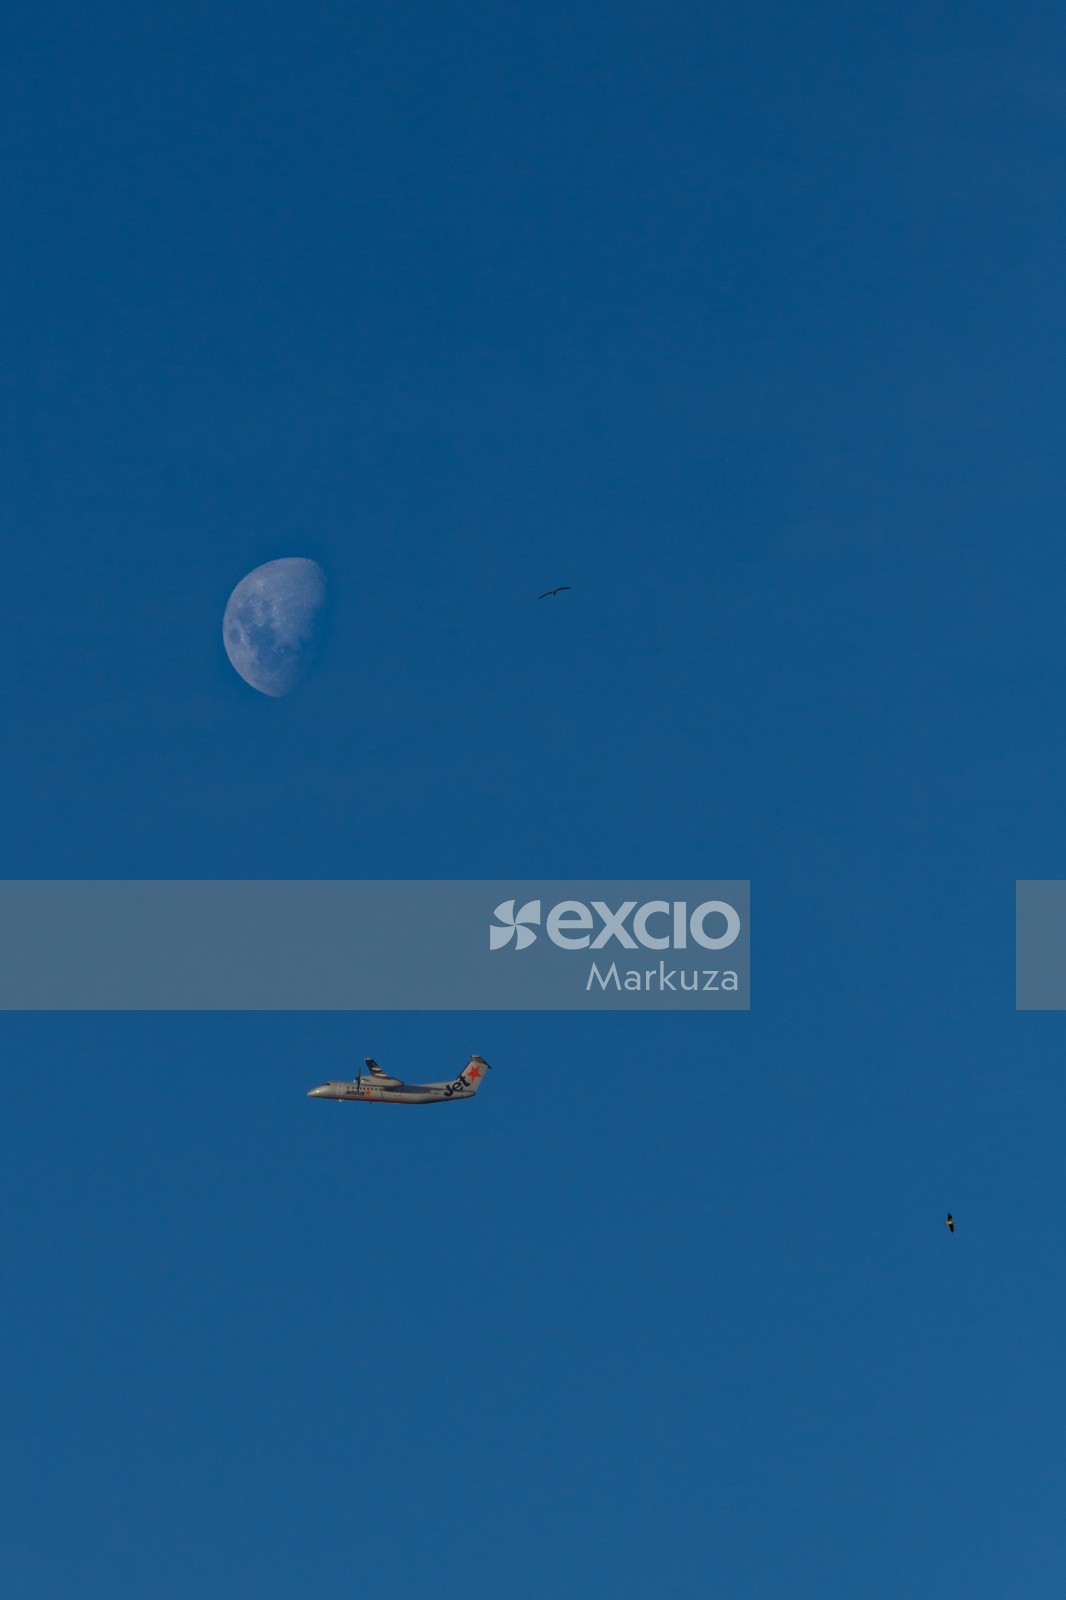 Moon and Jet Star plane